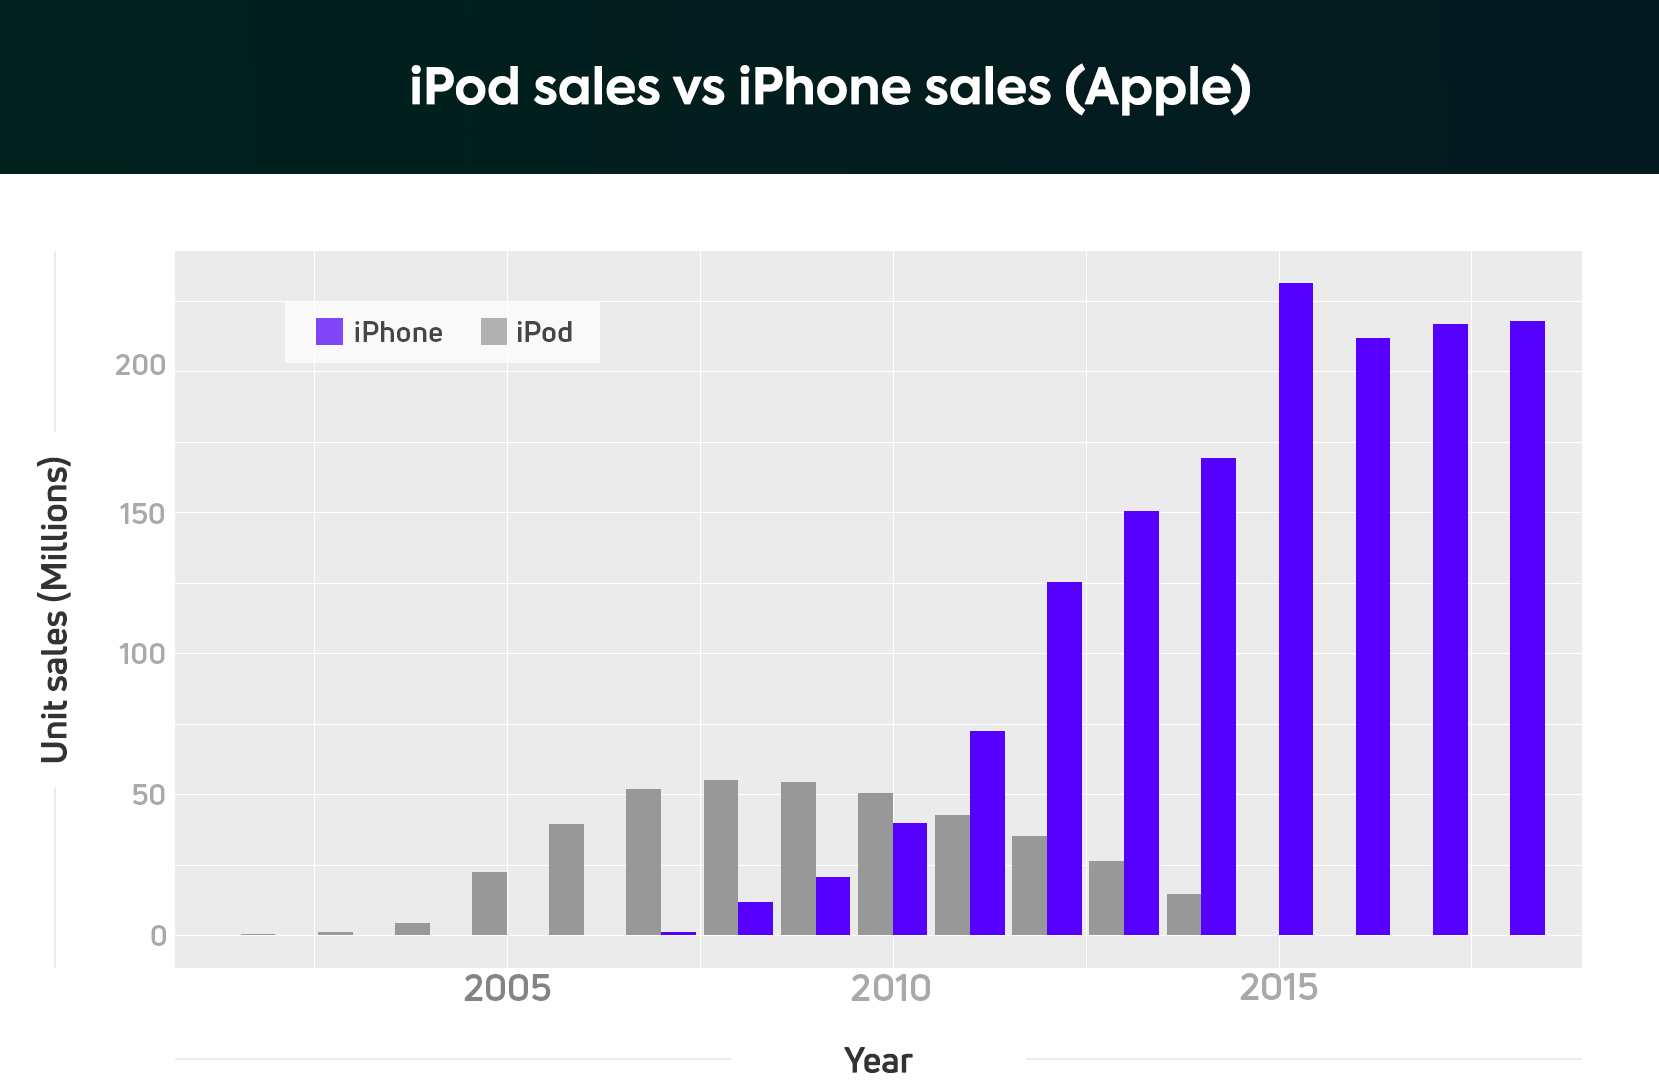 A chart detailing the sales figures (units) by yearfor the Apple iPod and Apple iPhone.